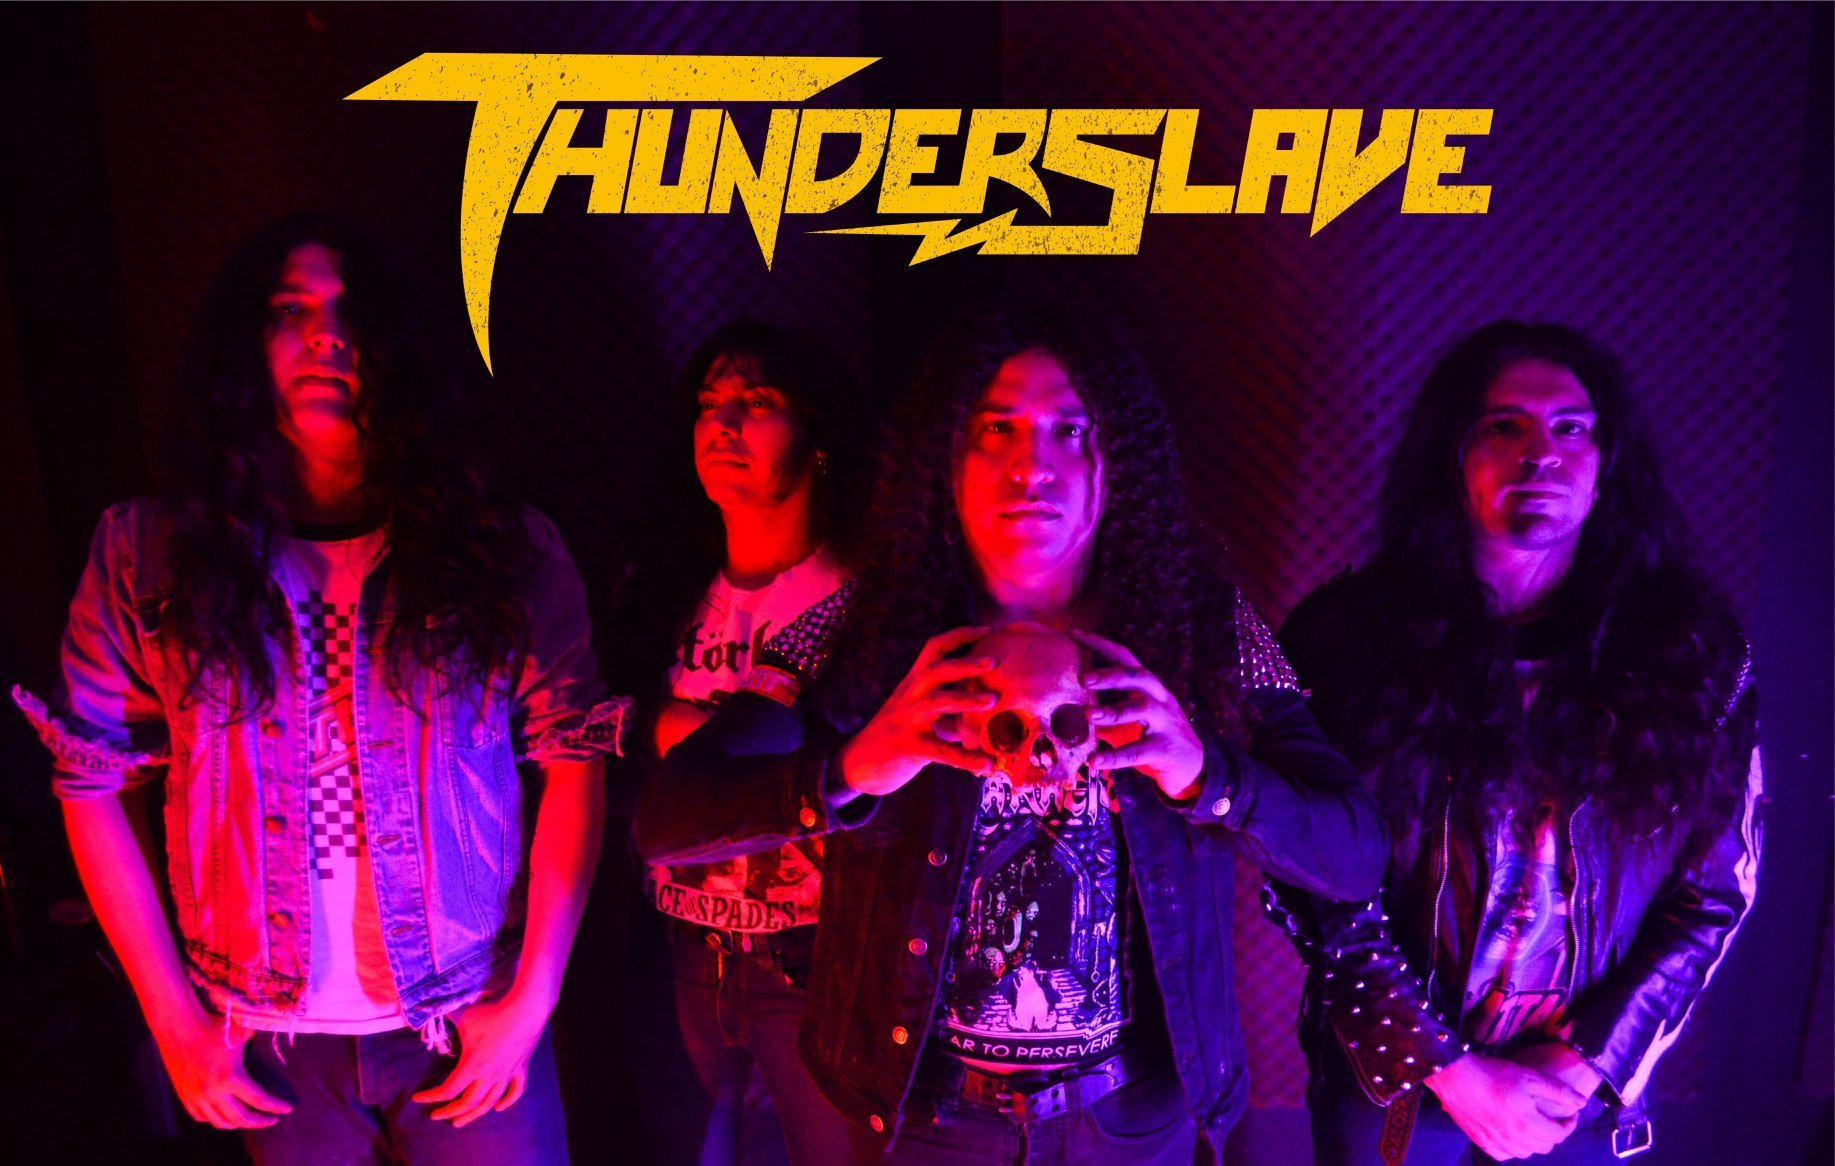 Interview with THUNDERSLAVE